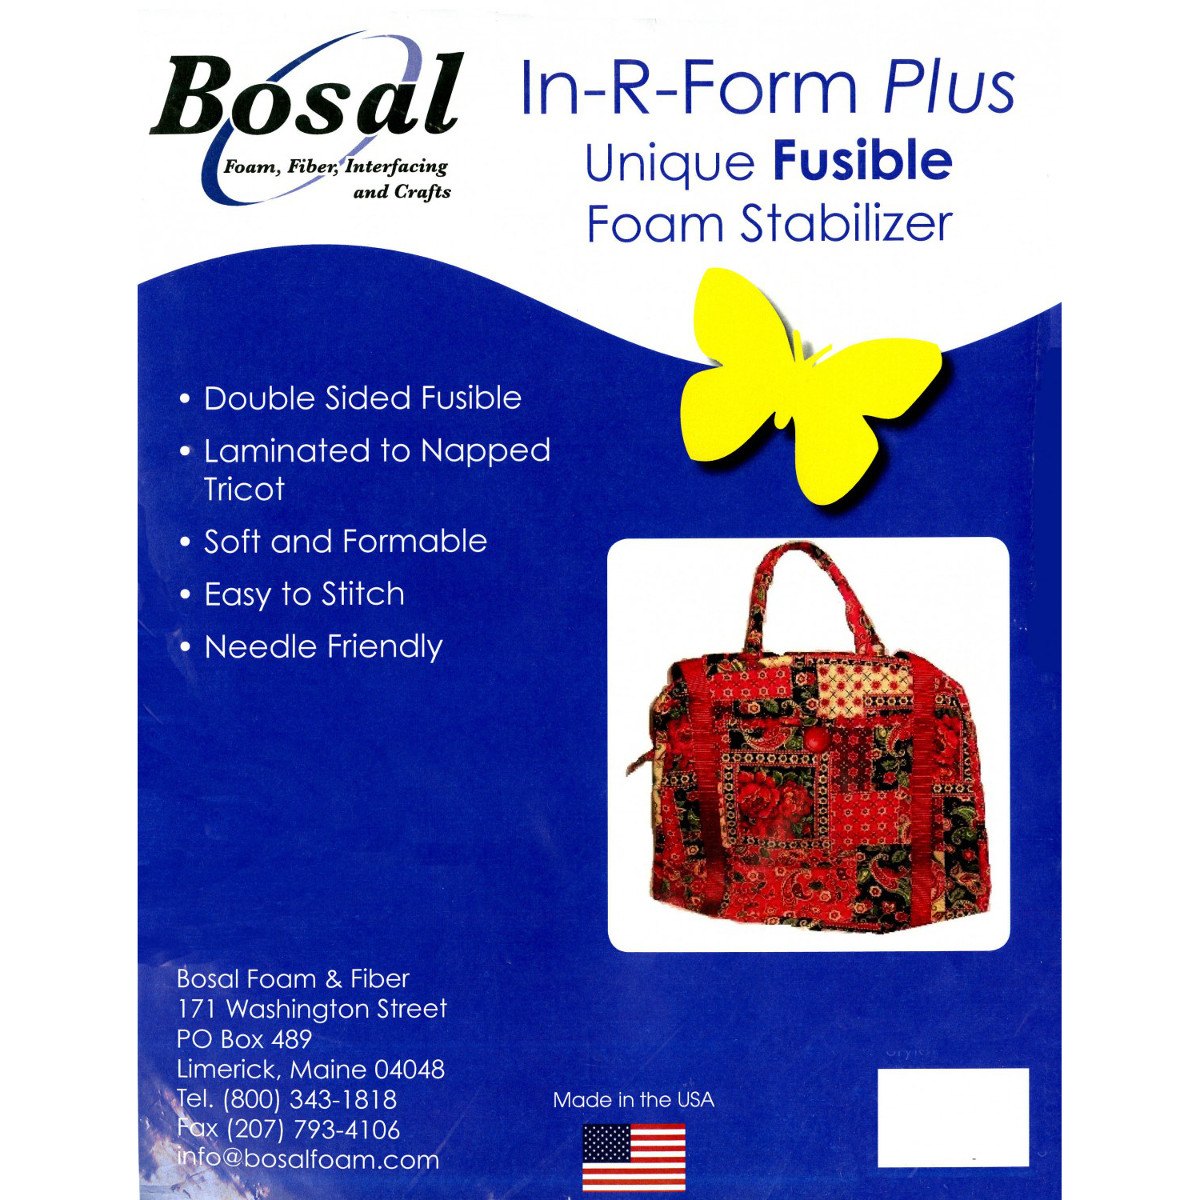 In-R-Form Plus Double-sided Fusible Foam Stabilizer, 36"x58" image # 41877